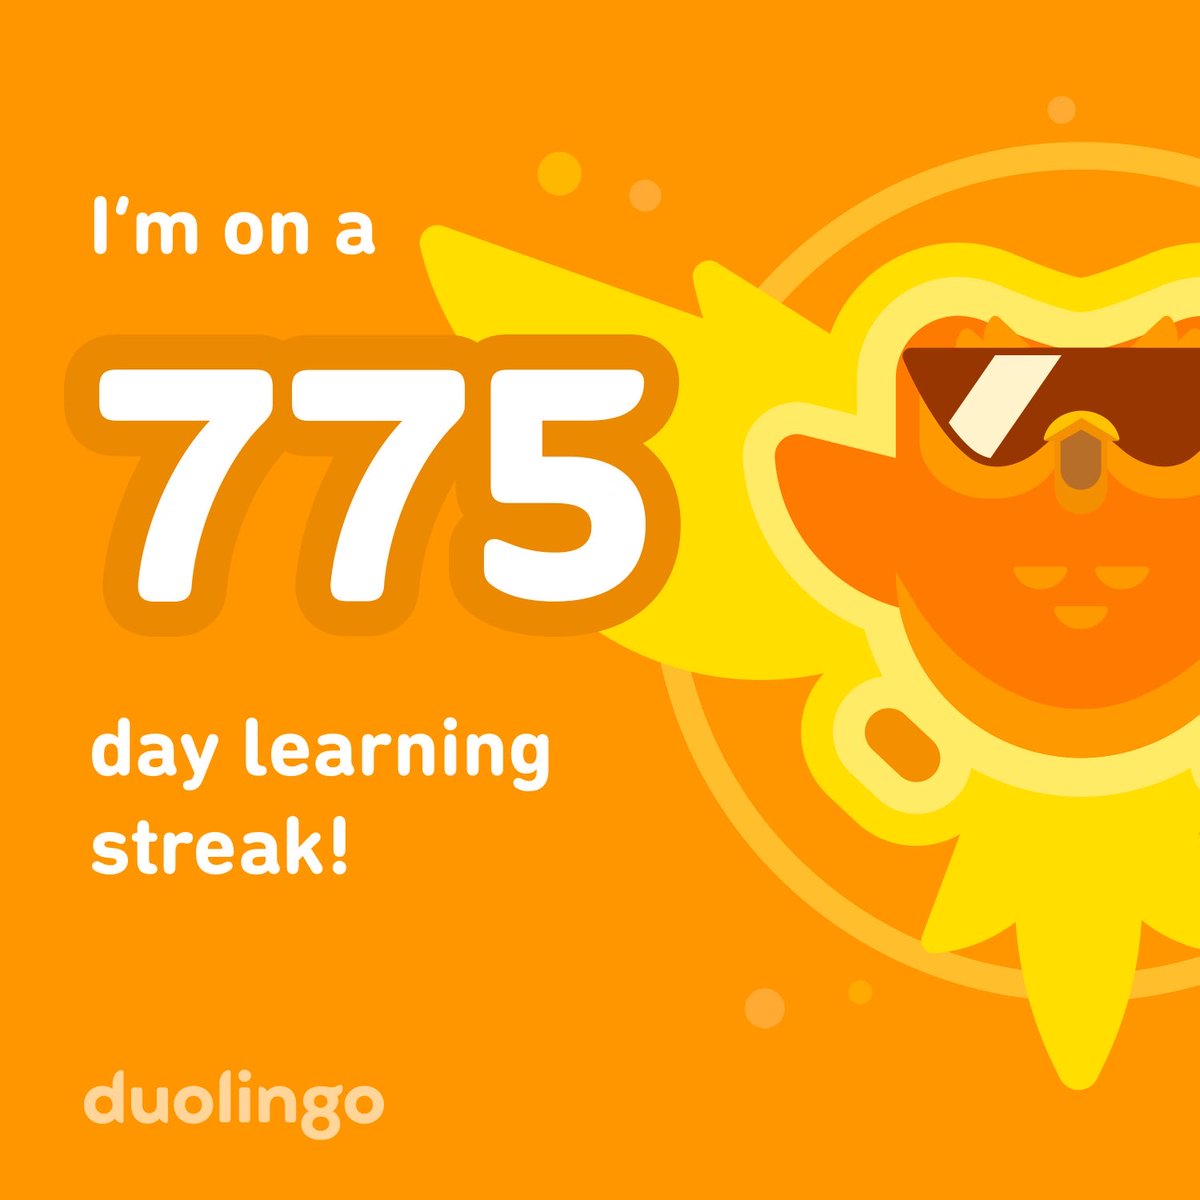 I’ve been practicing Spanish every day for a long time! It’s part of my personal commitment to continuous learning. Thanks ⁦@duolingo⁩!